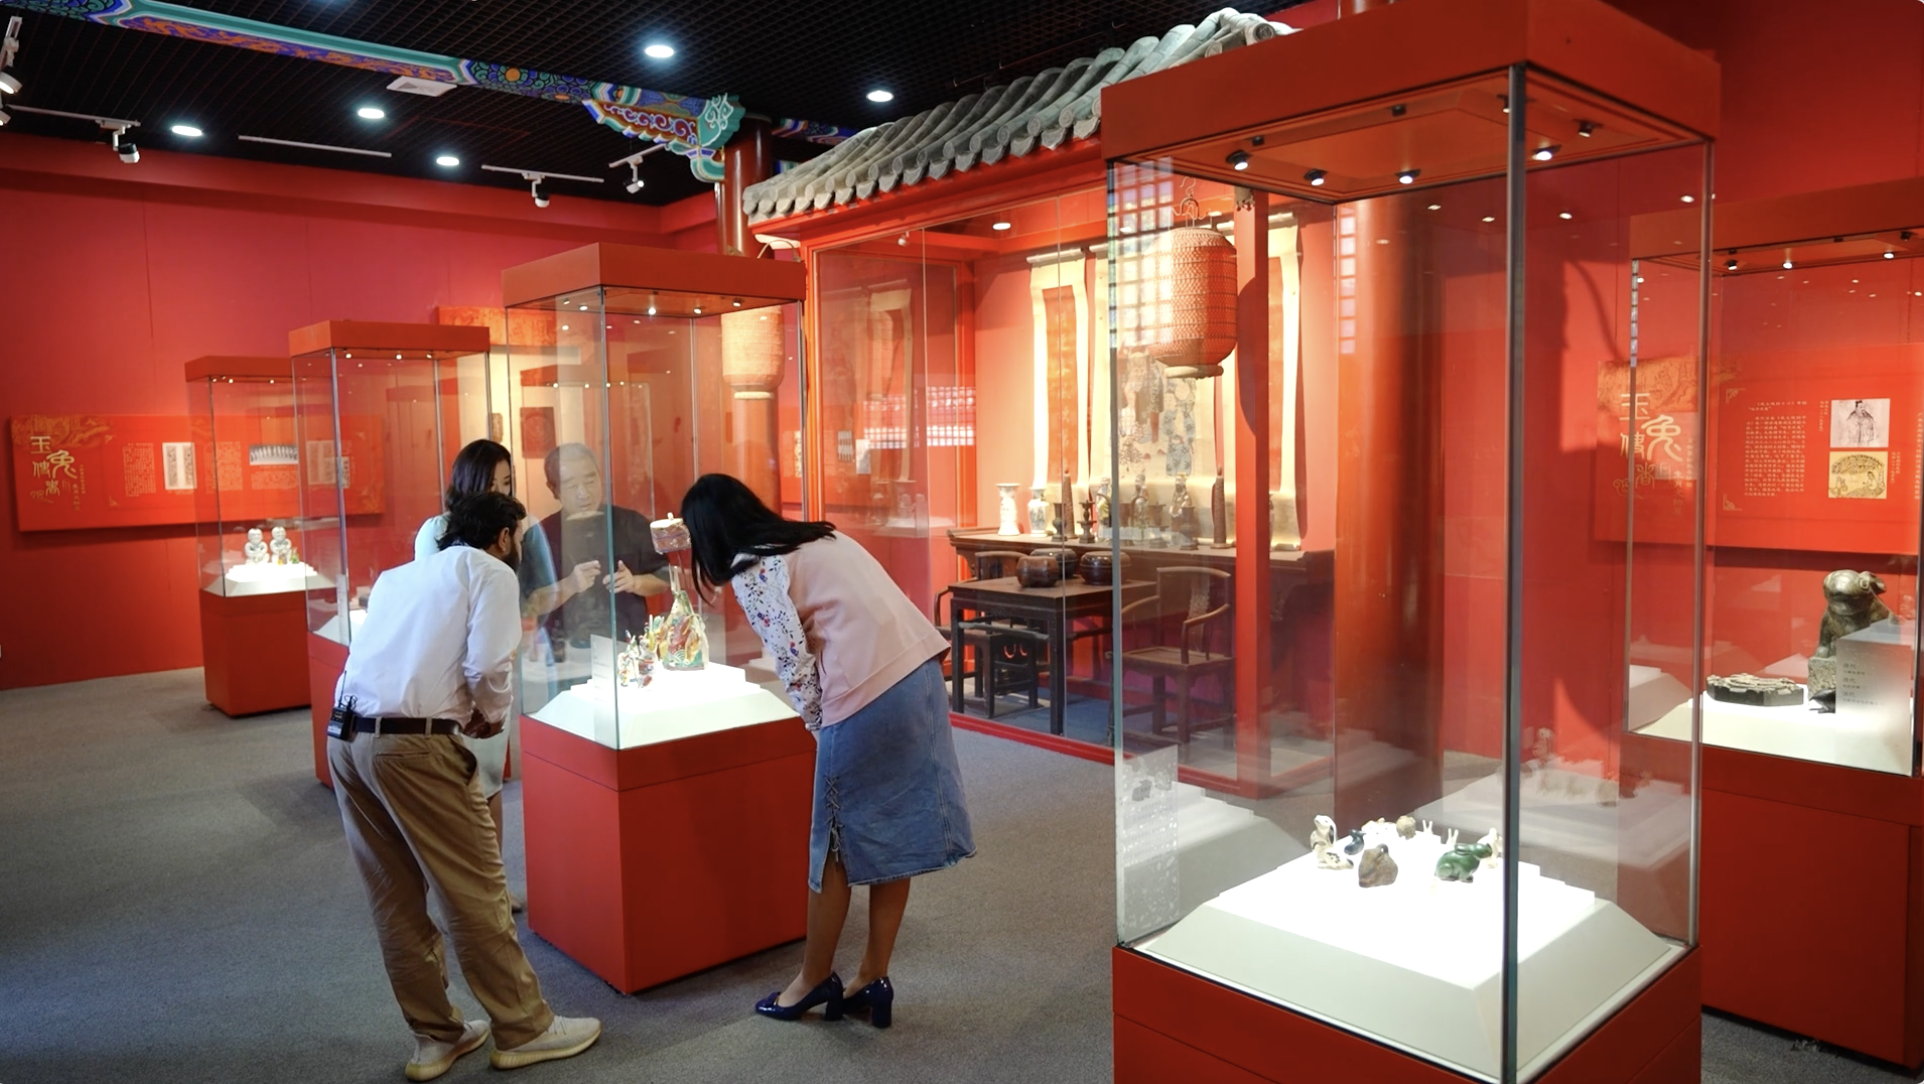 Beijing Folk Custom Museum curator Cao Yansheng introduces the exhibits to two guests and CGTN's Caroline Wu. / CGTN